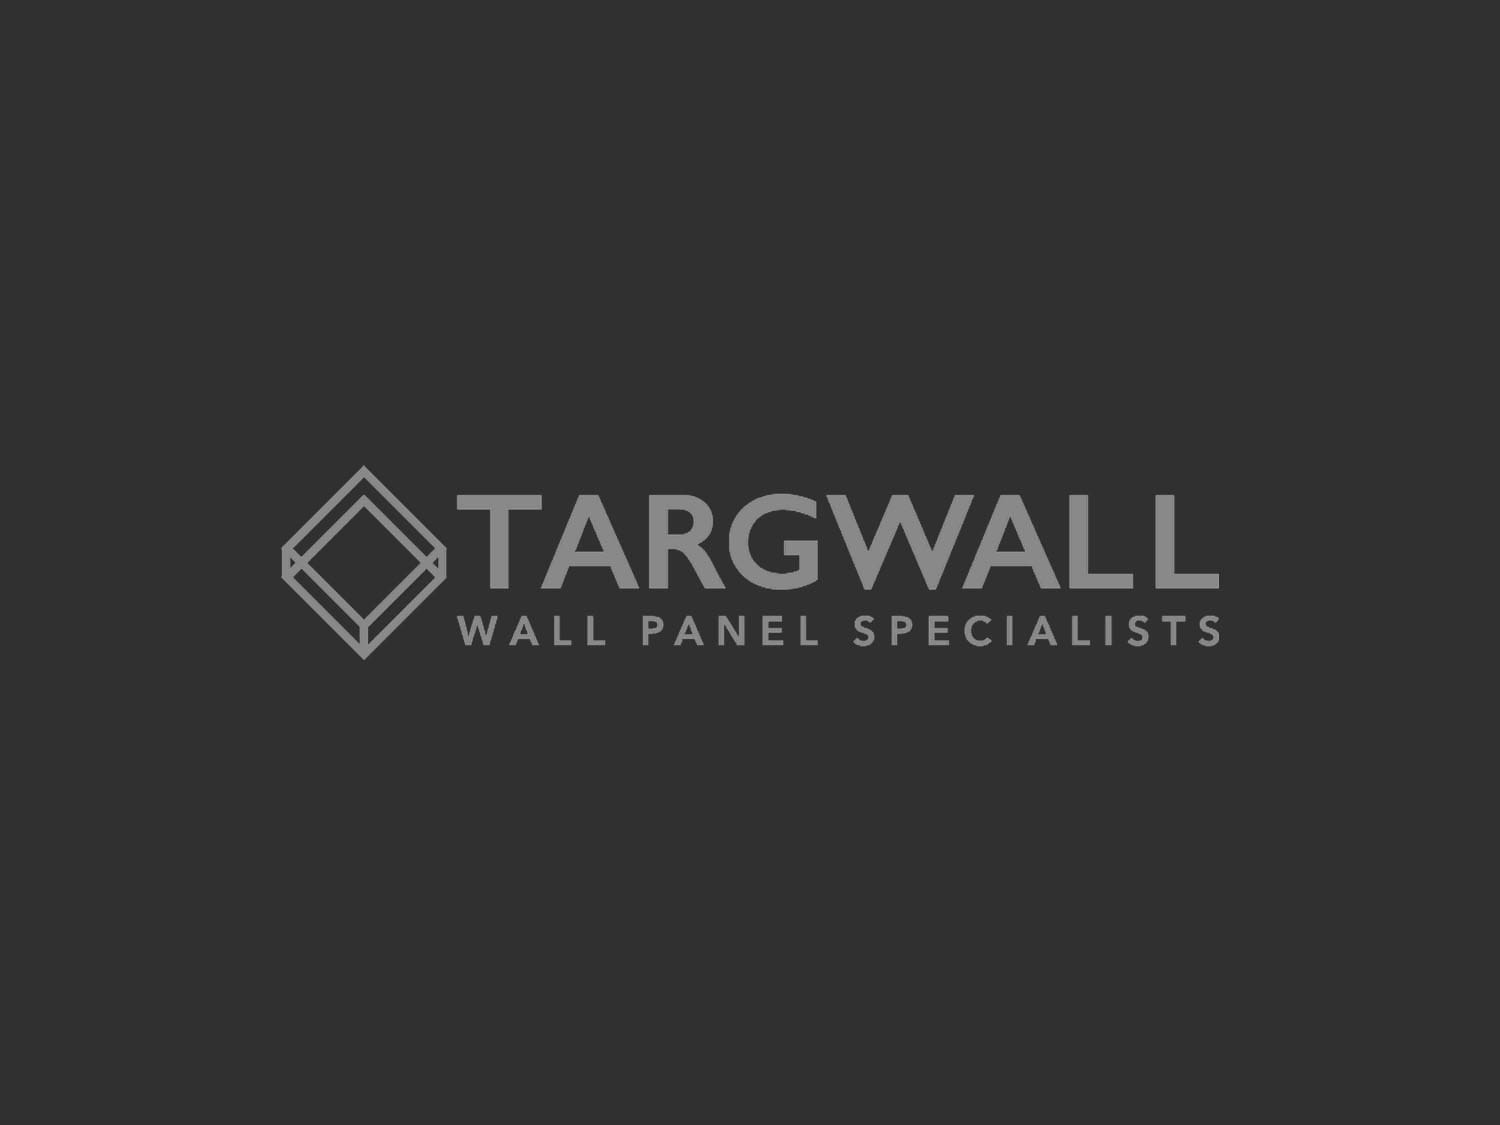 A logo designed by a freelance web designer for Targwall wall panel specialists in Essex.